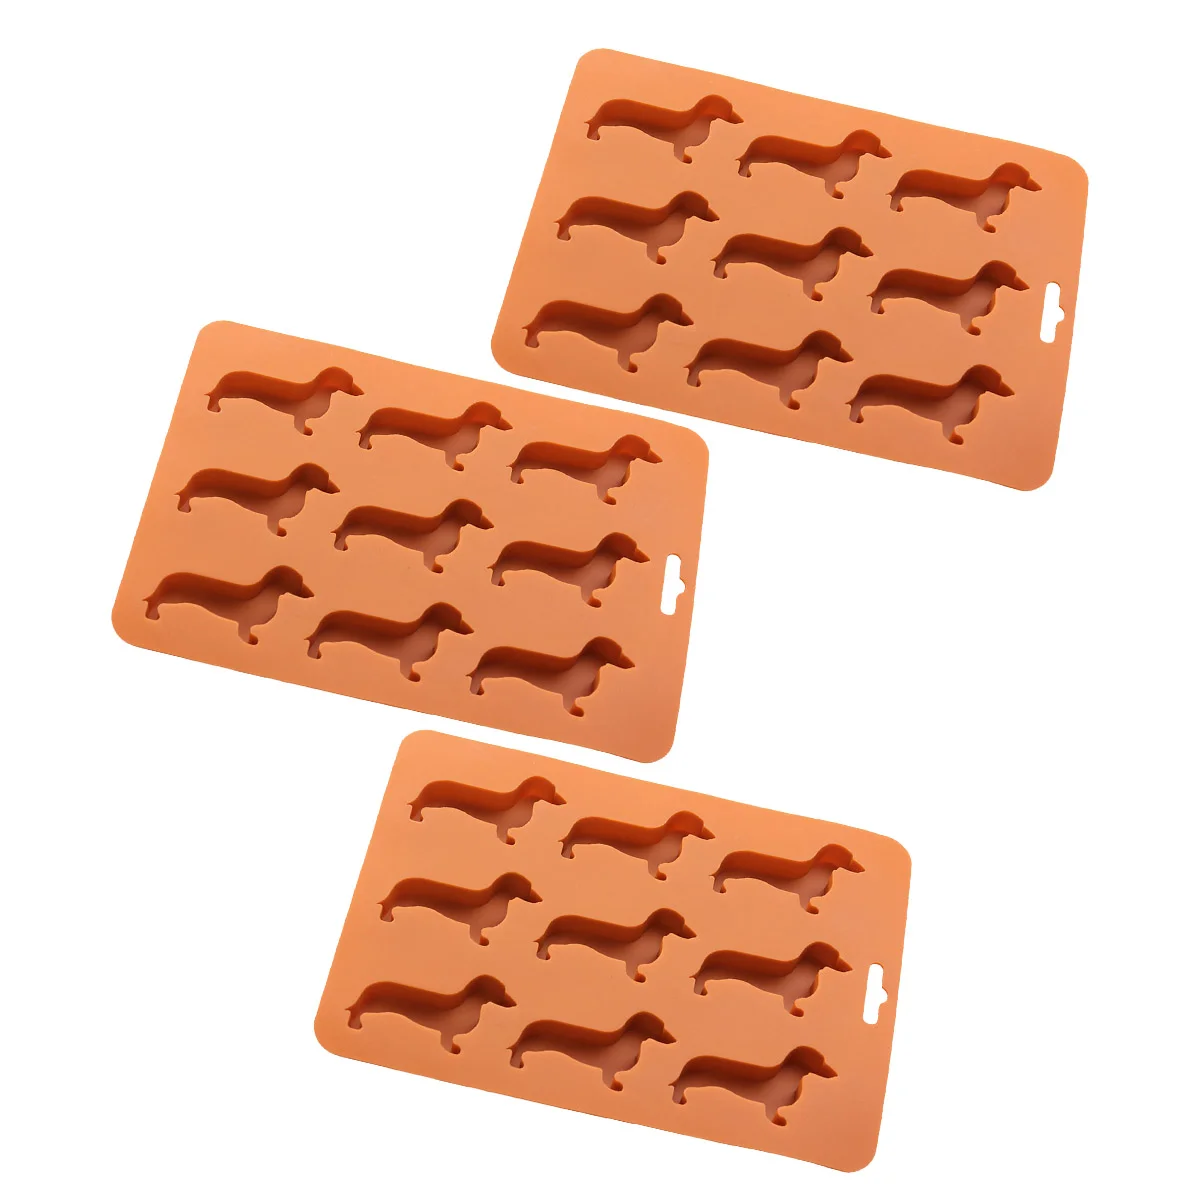 

3pcs 9-grid Frozen Ice Cube Mold Puppy Shaped Cake Mold DIY Ice Cream Mold Silicone Ice Brick Mould Popsicle Mold Kitchen